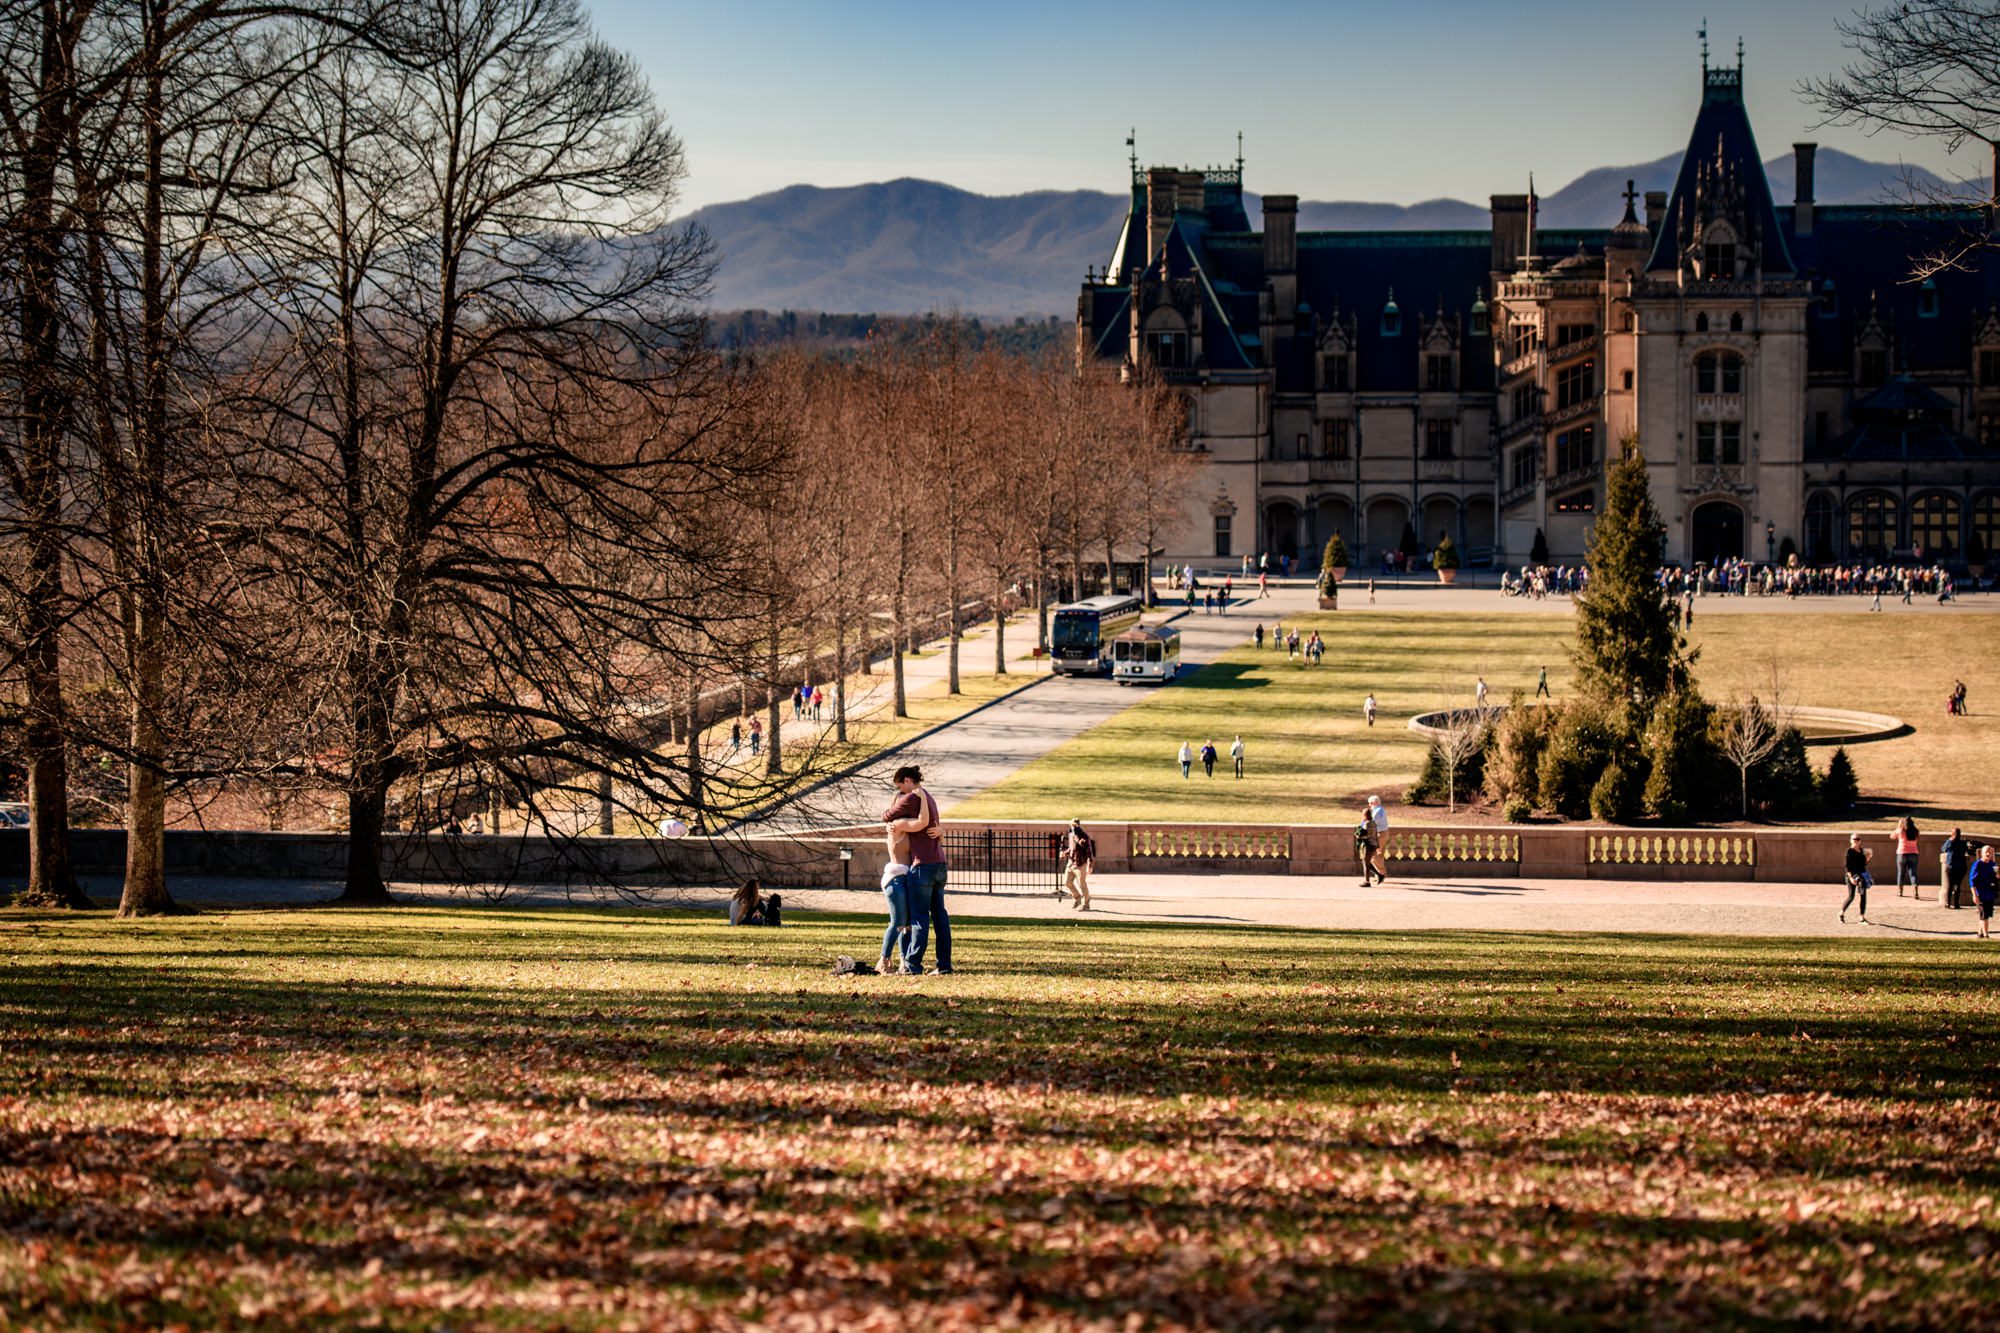 guy proposes to his girlfriend on the diana lawn at biltmore estate